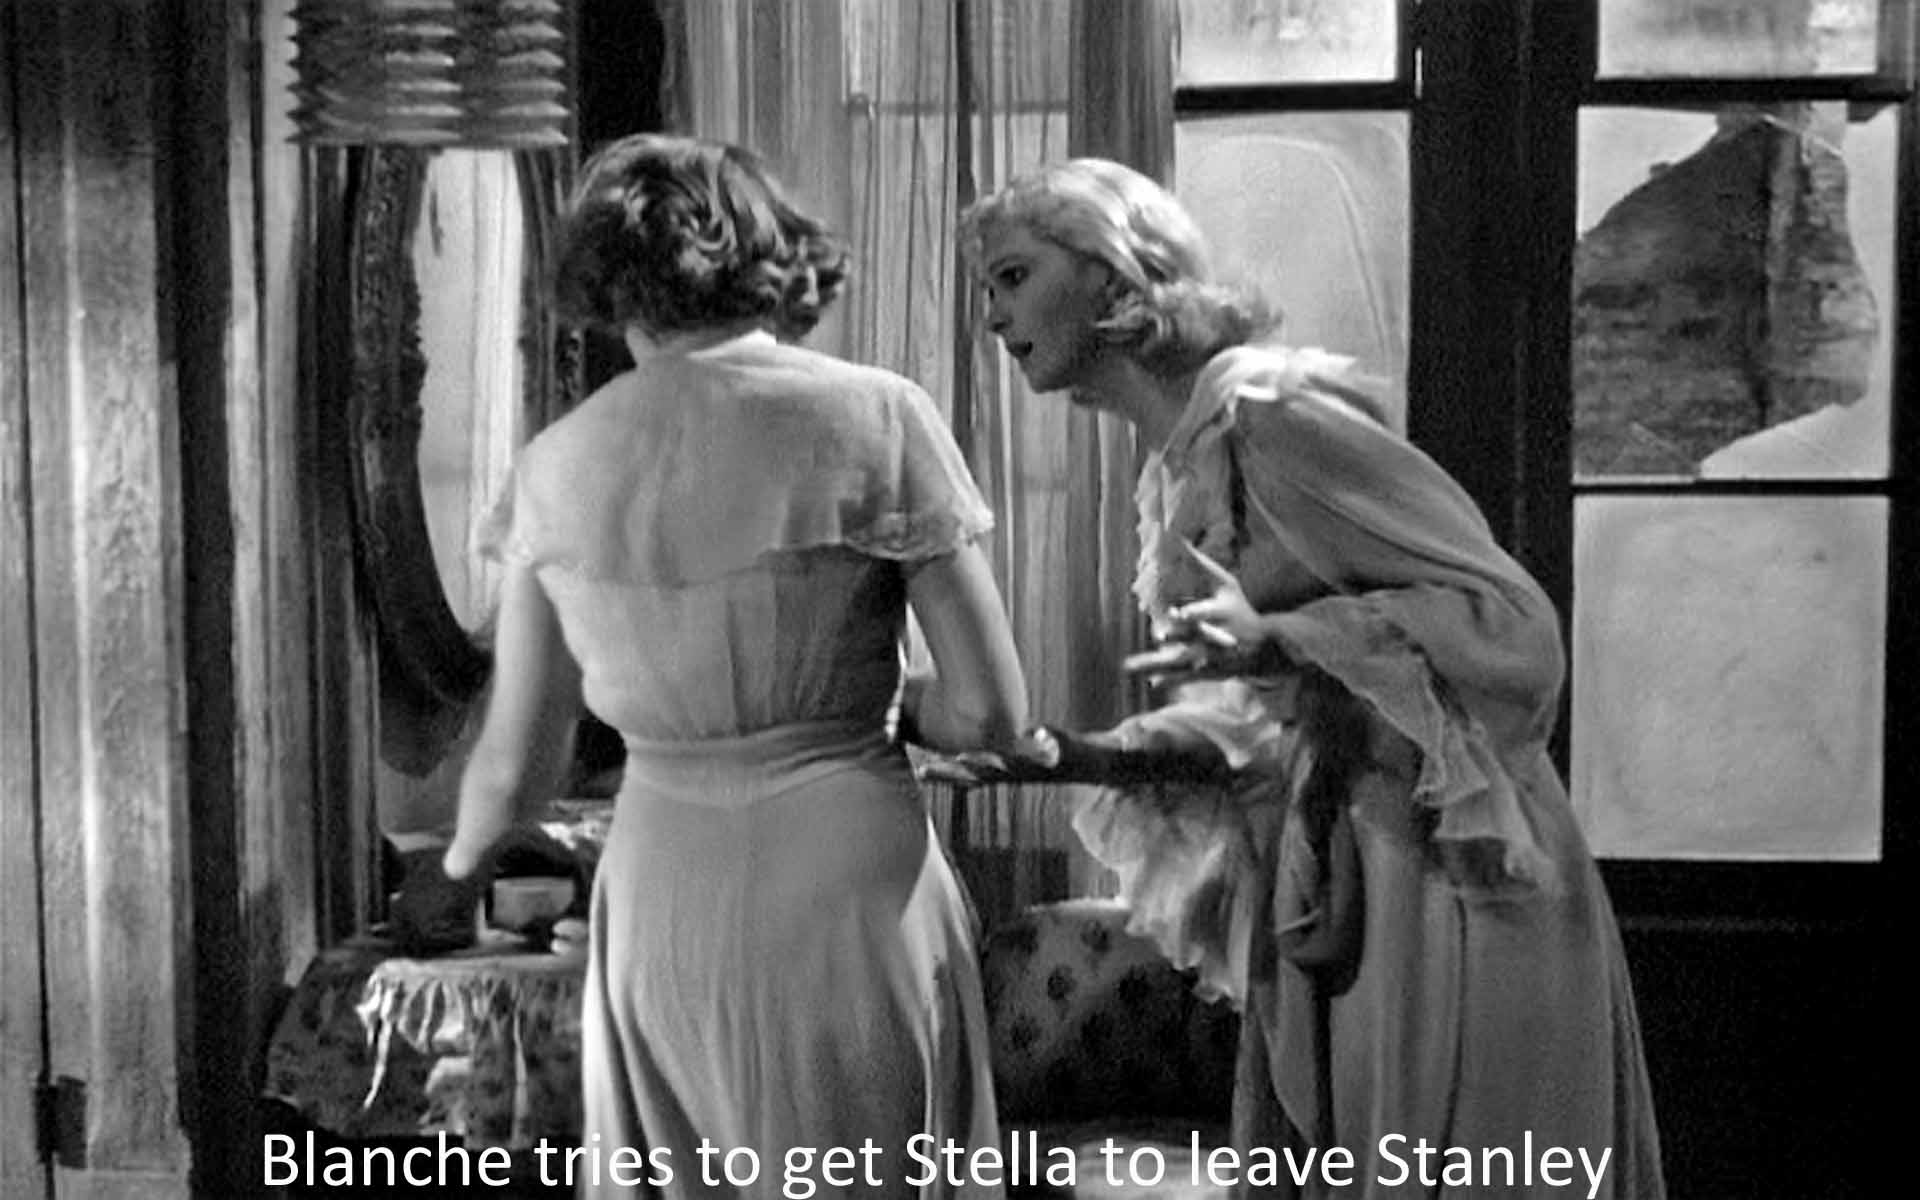 Blanche tells Stella to leave Stanley